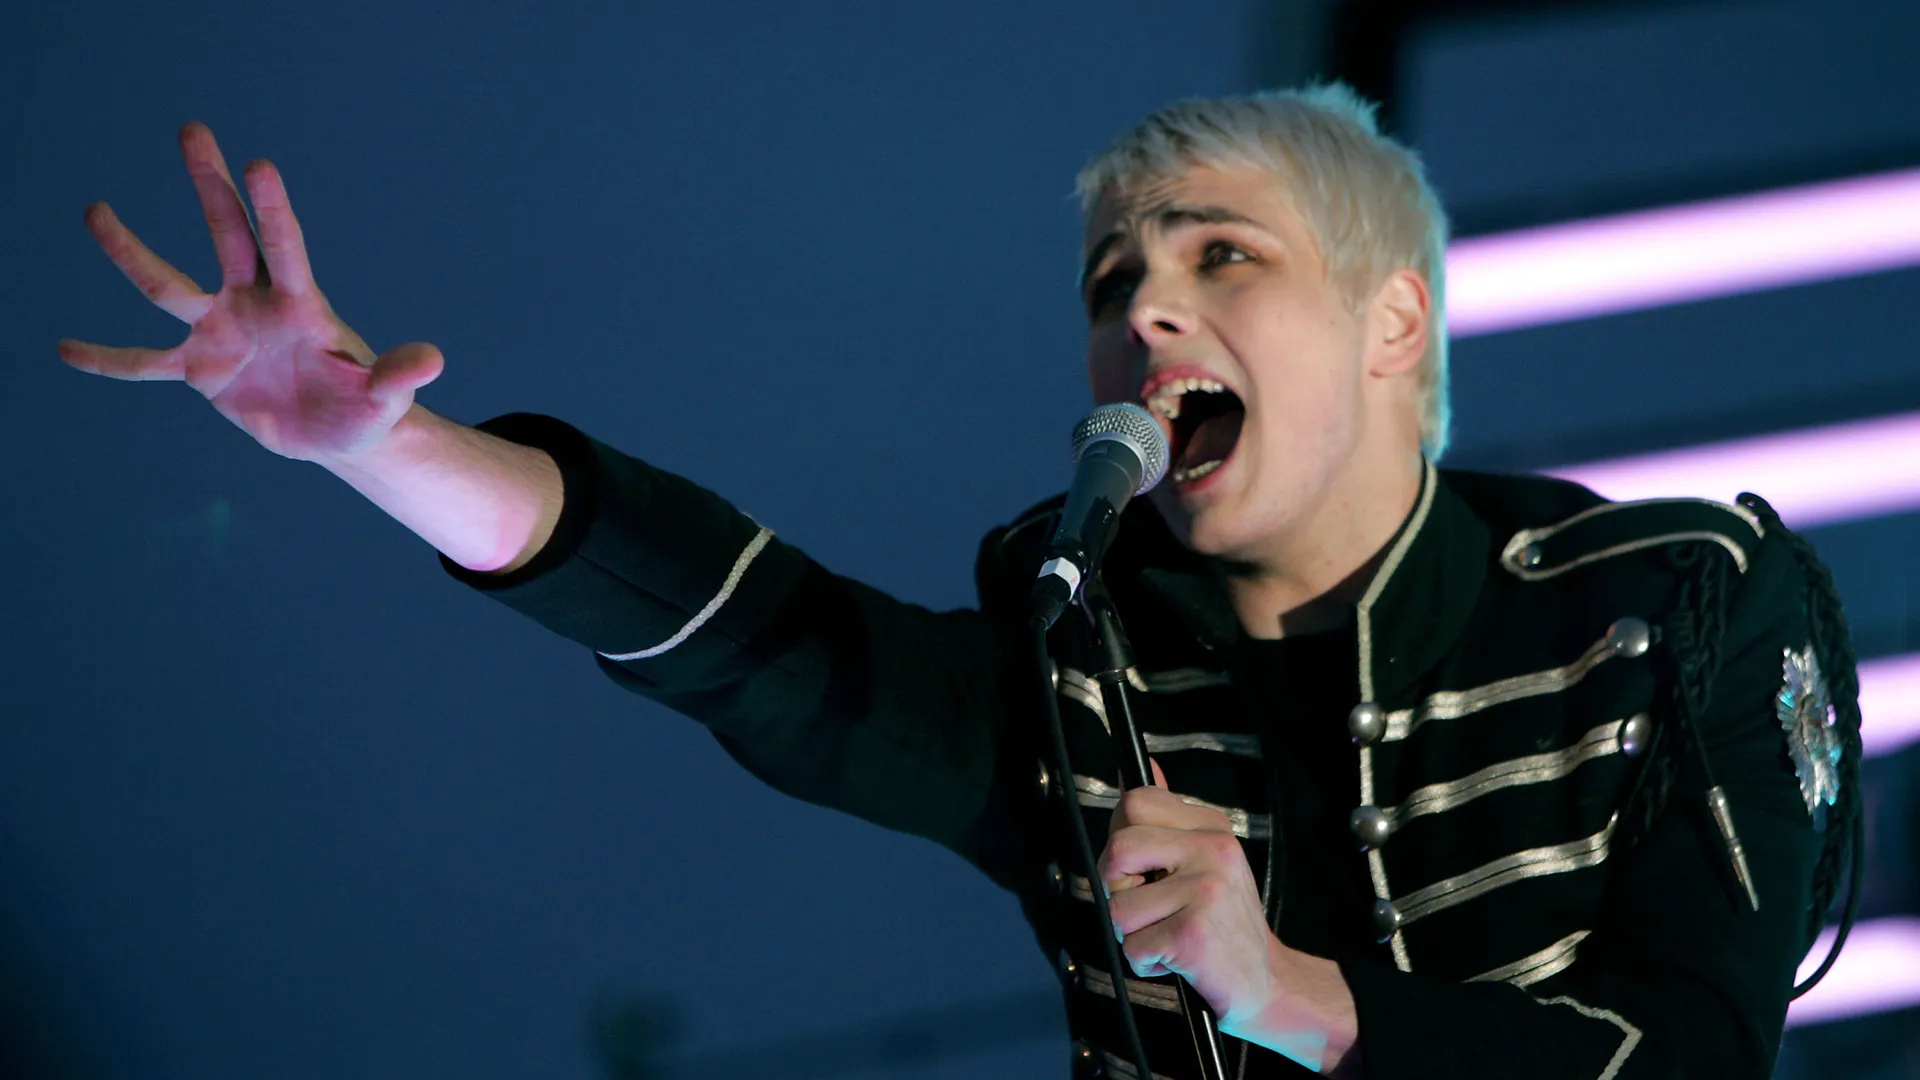 1920x1080 Run That Back: My Chemical Romance's 'Black Parade' is 15